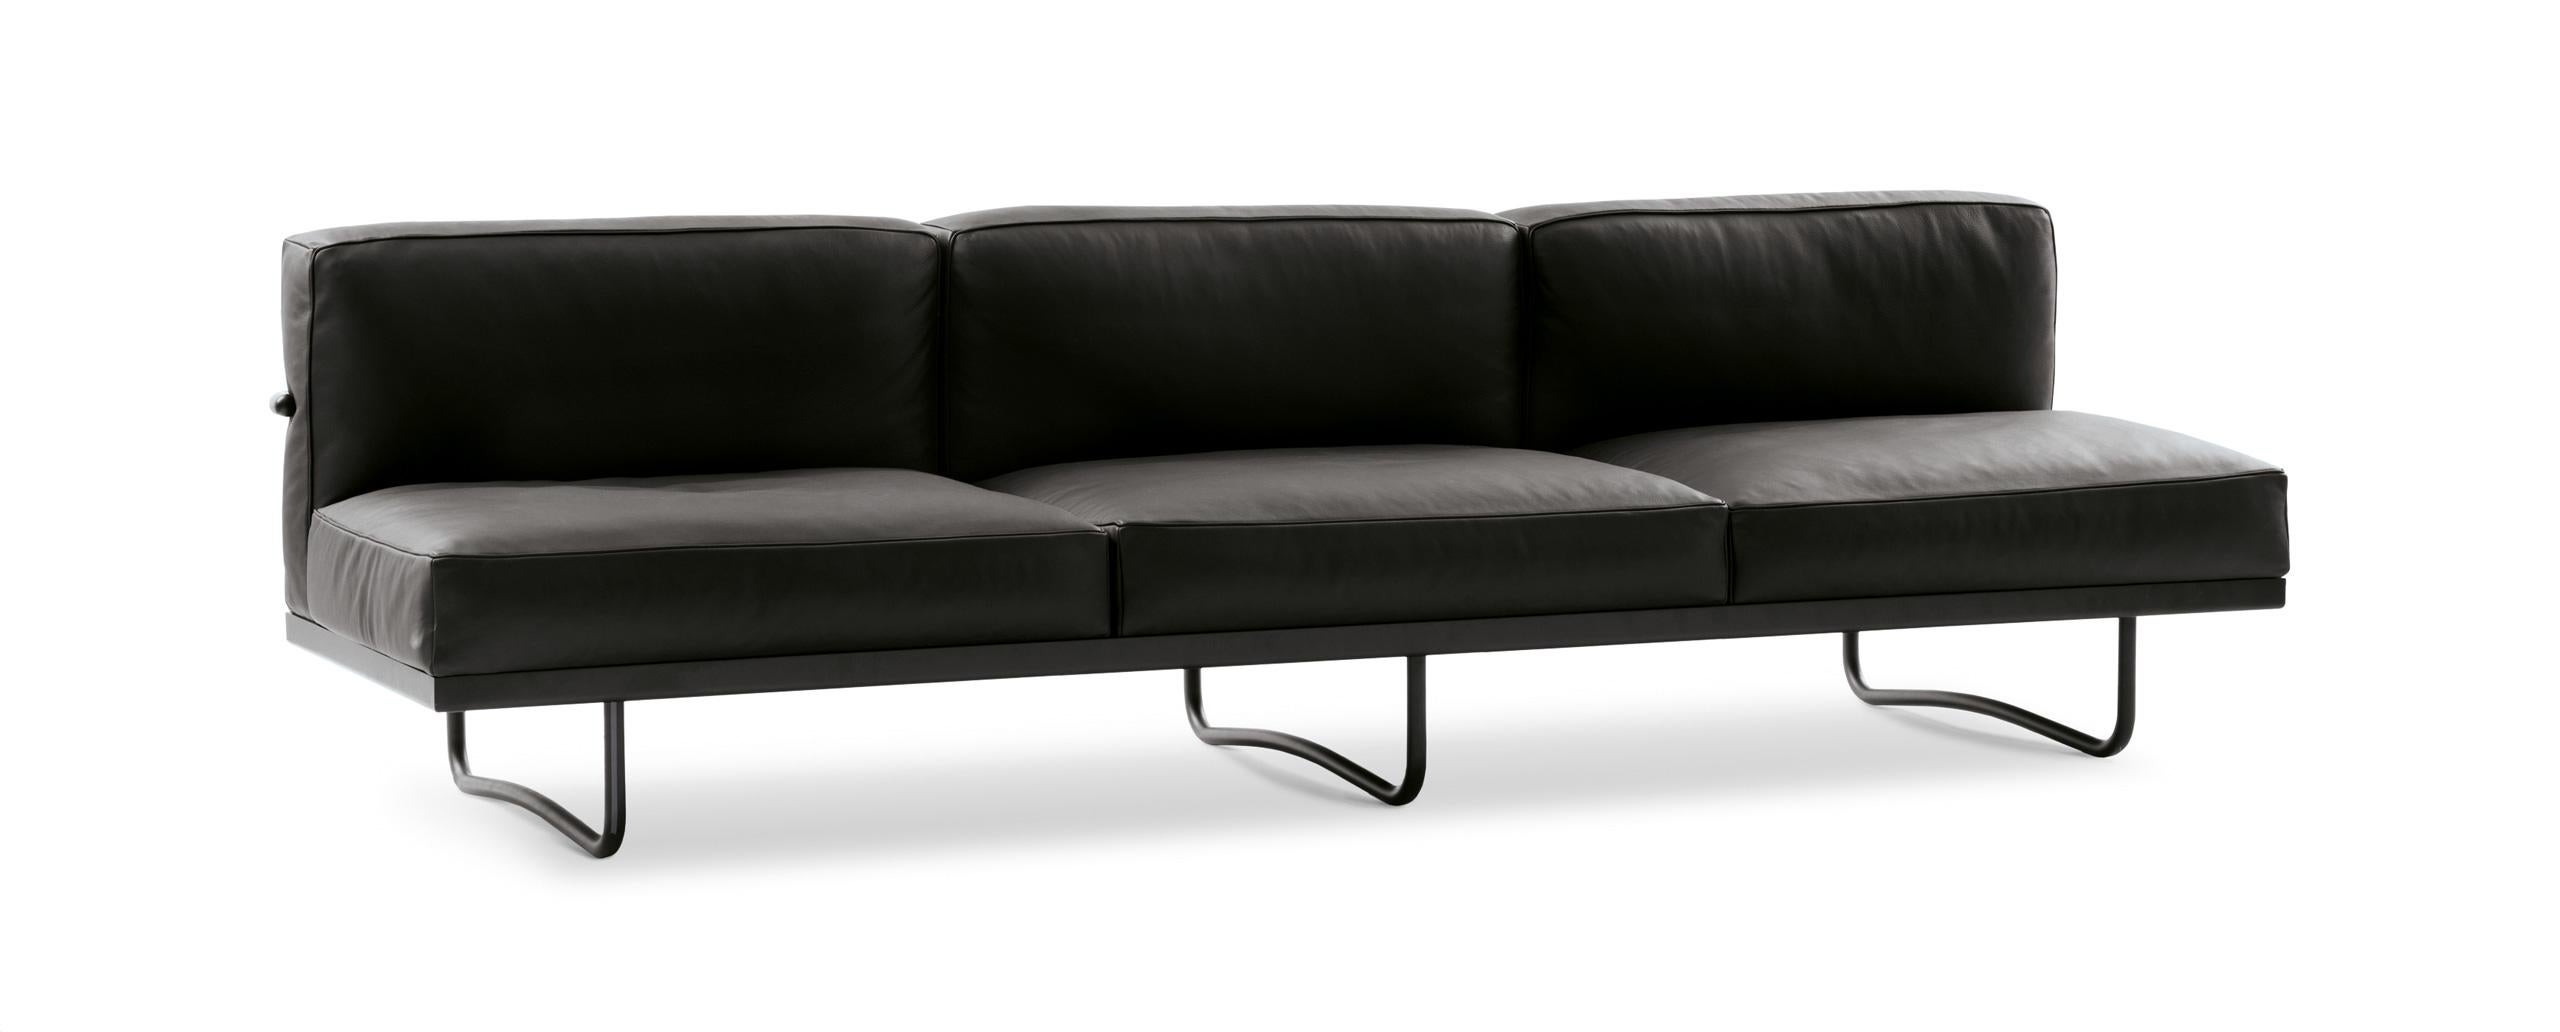 Sofa designed by Le Corbusier, Pierre Jeanneret, Charlotte Perriand in 1934. Relaunched by Cassina in 2014. Manufactured by Cassina in Italy.

Contemporary and comfortable lines for this sofa that was designed by Le Corbusier for his Paris